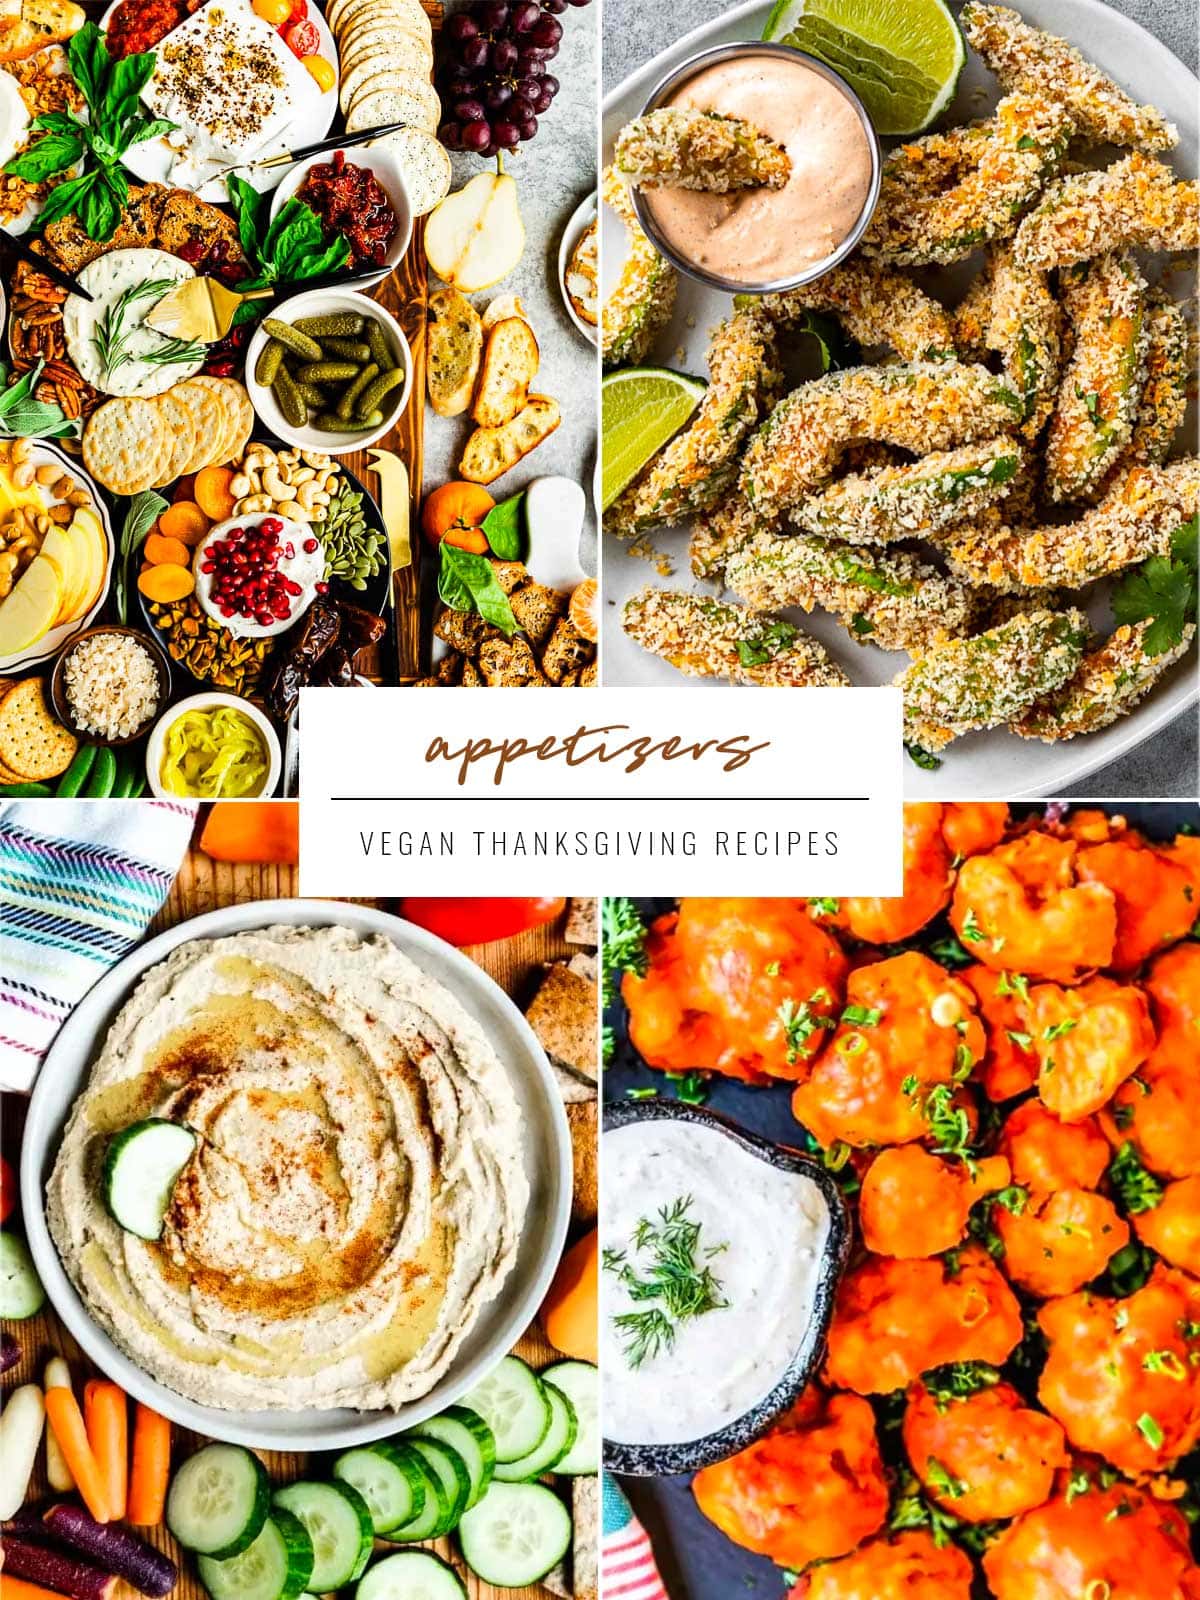 4 photos together with the word appetizers for Vegan Thanksgiving Recipes written over top. Recipe images include vegan charcuterie board, avocado fries, hummus and cauliflower wings